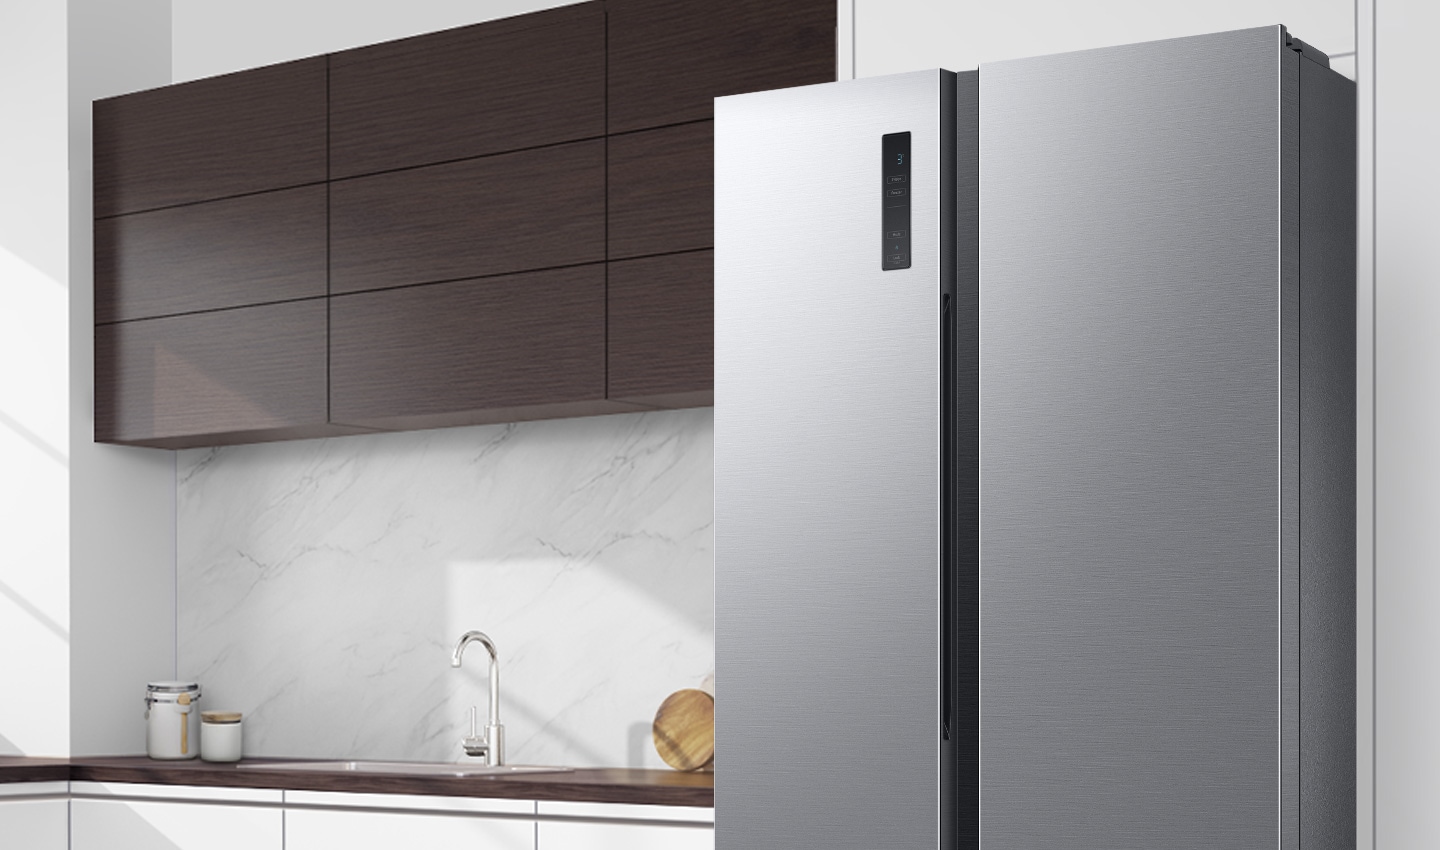 The RS3000BM is installed in the kitchen with minimal handles and a stylish front LED display.